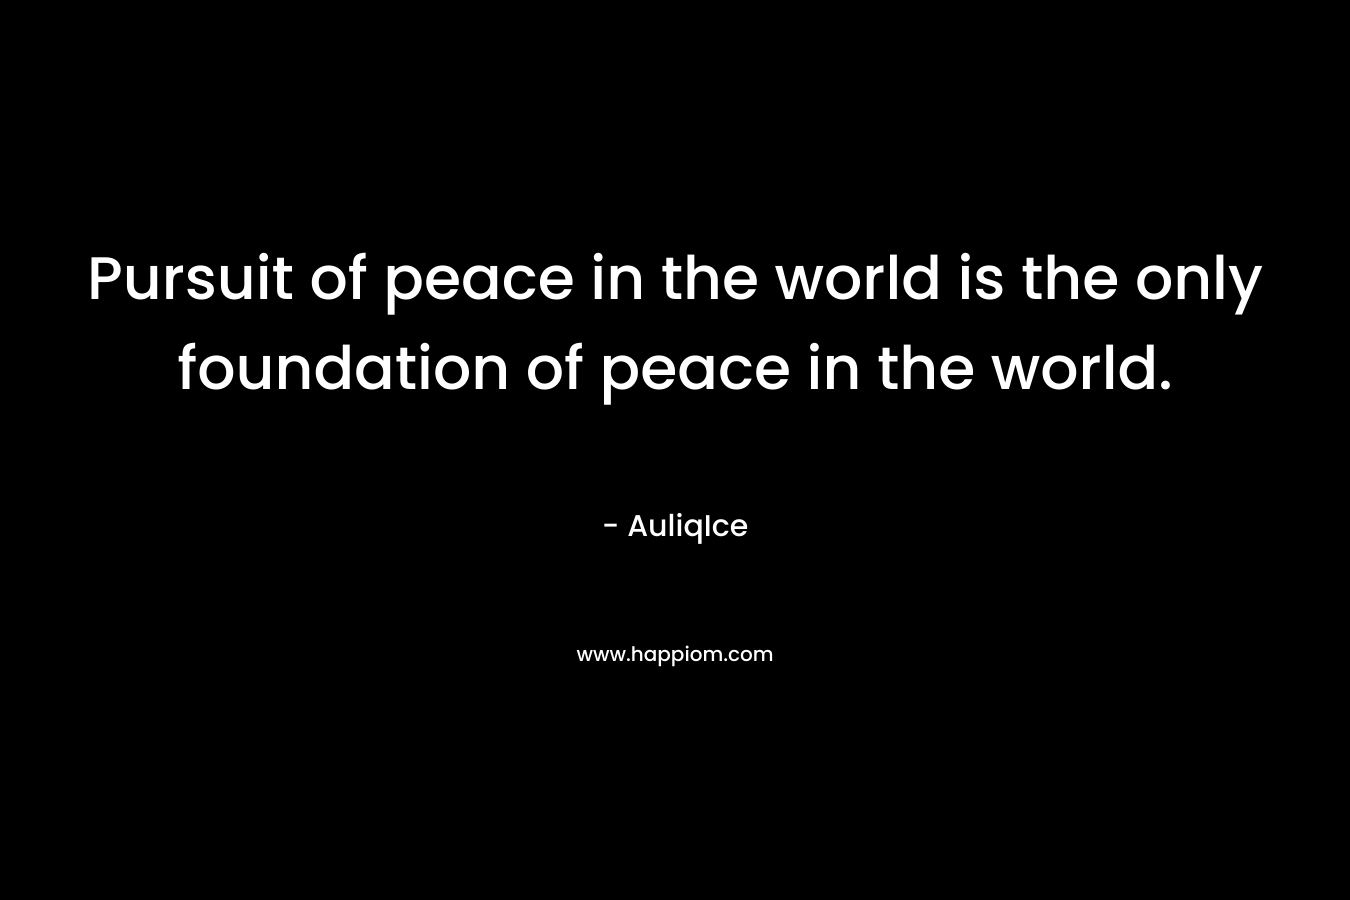 Pursuit of peace in the world is the only foundation of peace in the world.